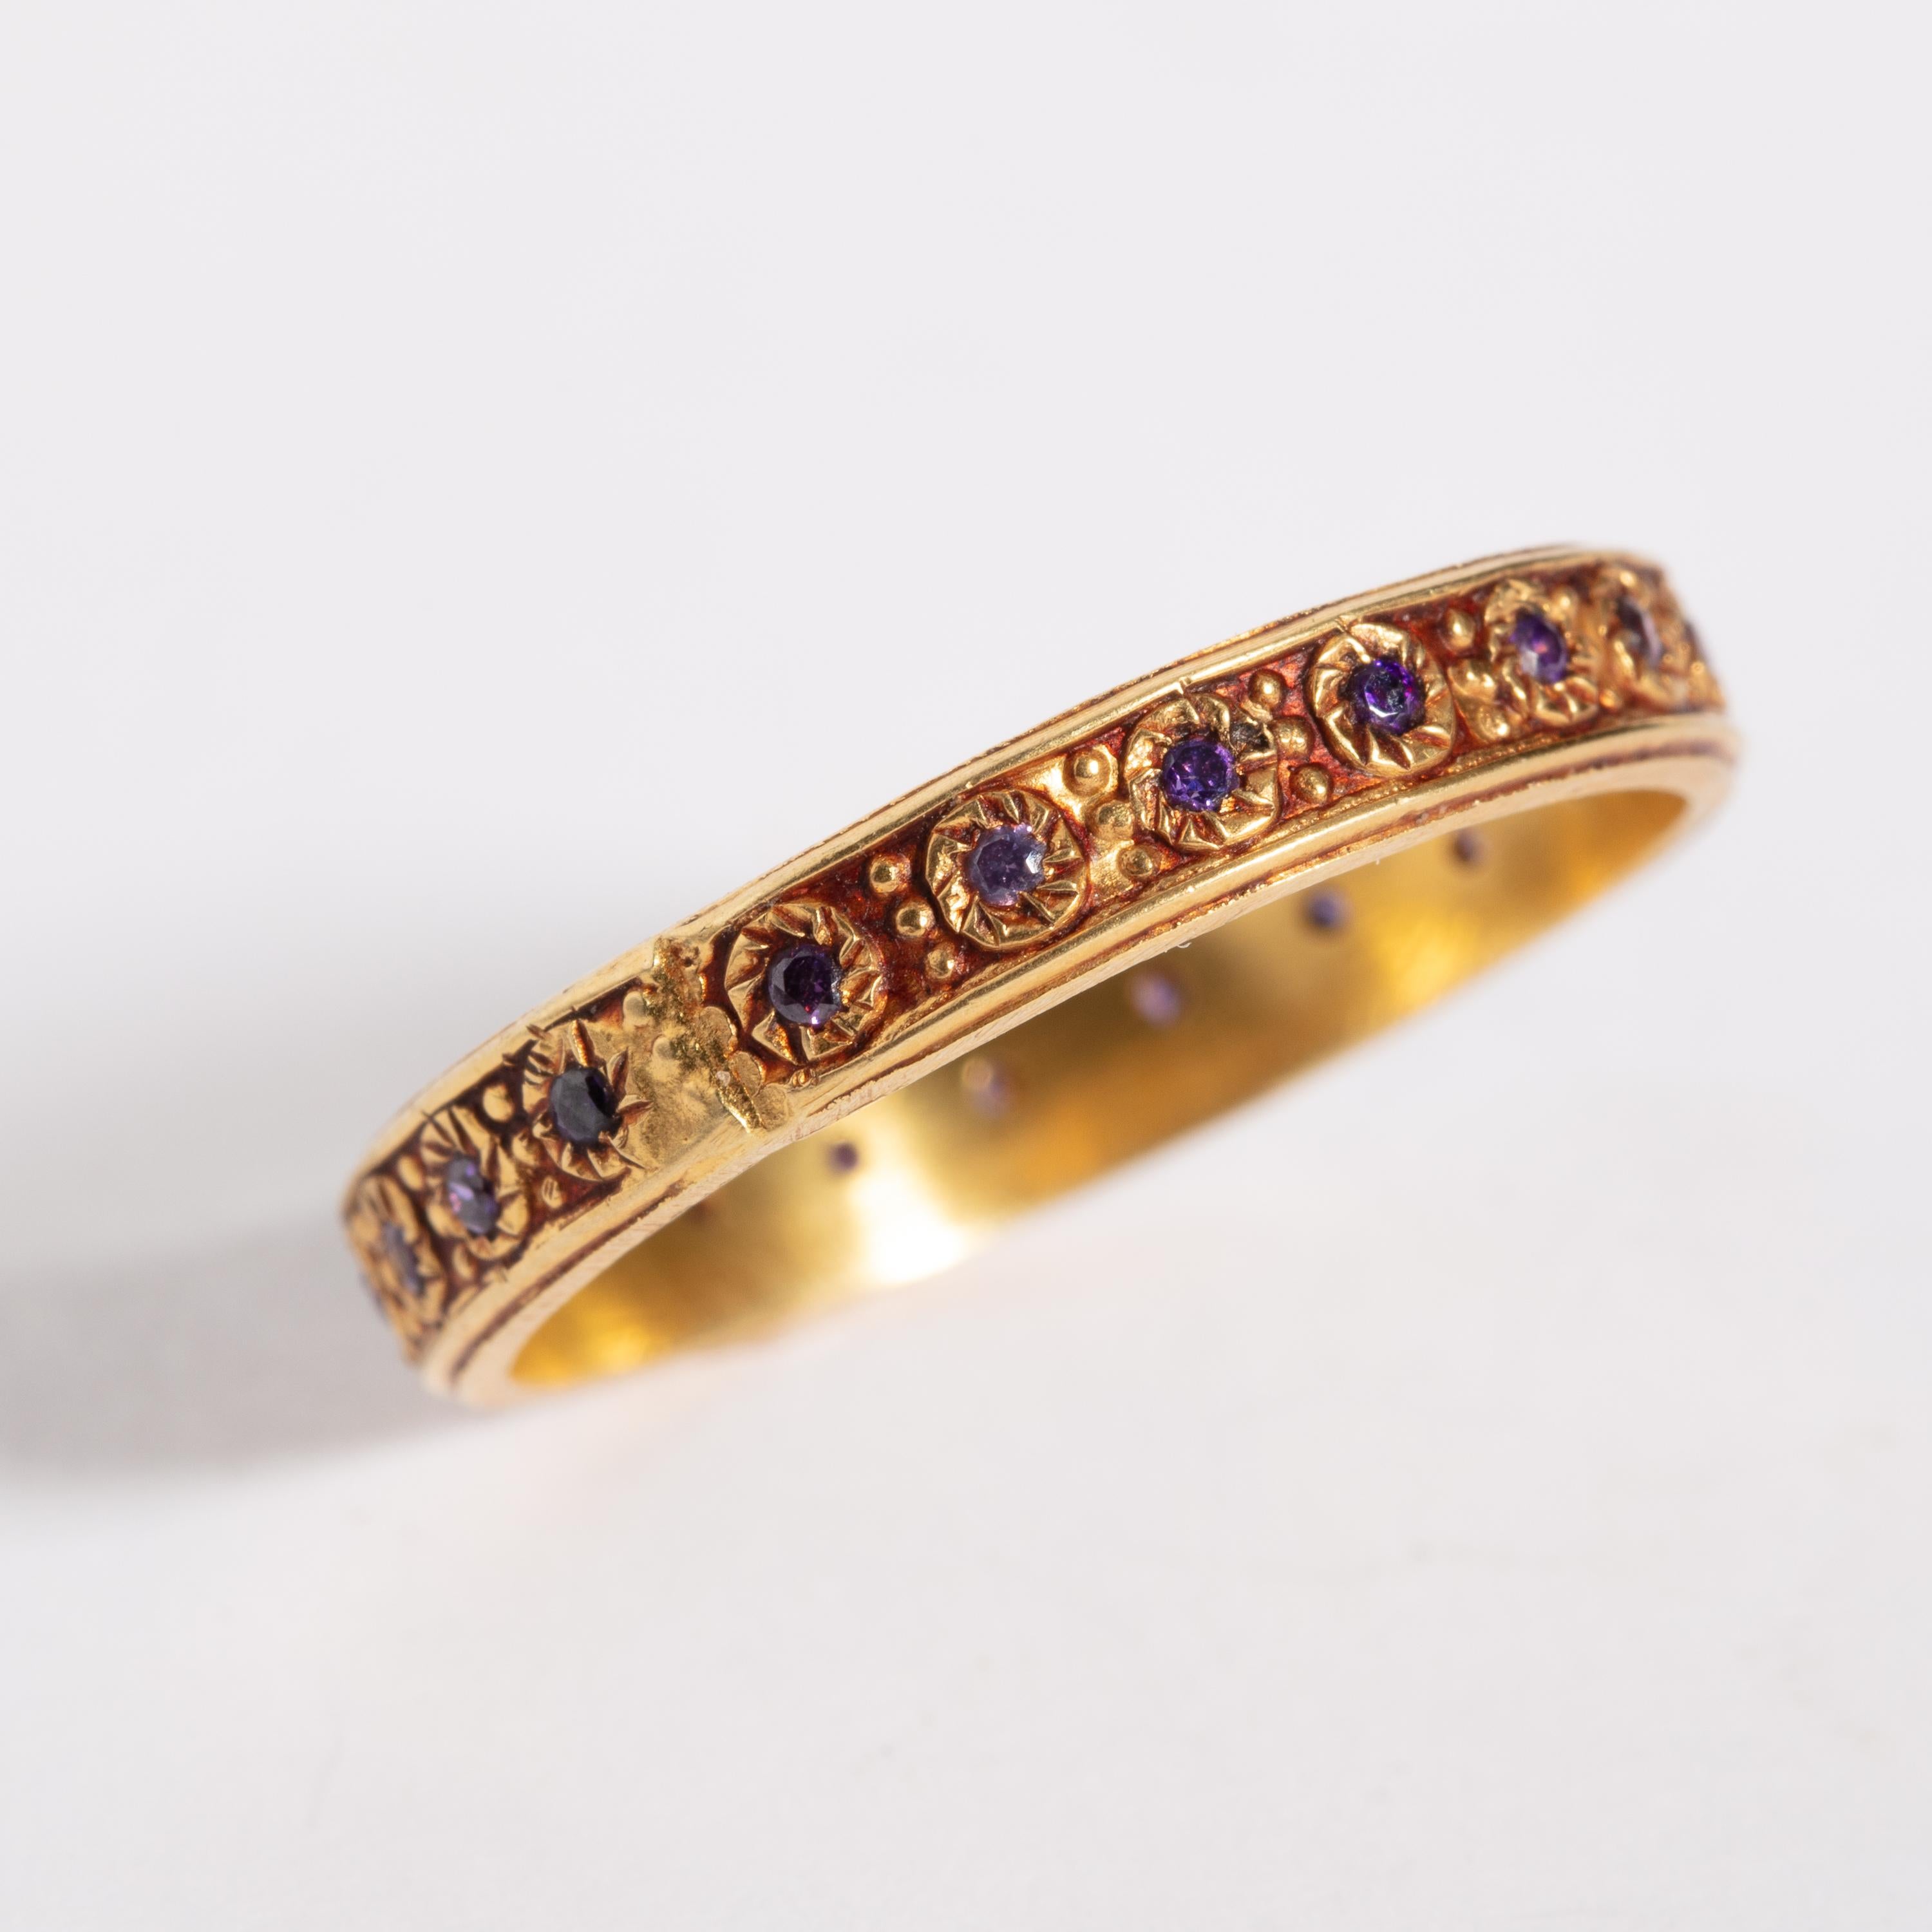 An 18K gold infinity band with fine granulation work set with faceted amethyst stones.  Ring size is 8.5  Late 1900's